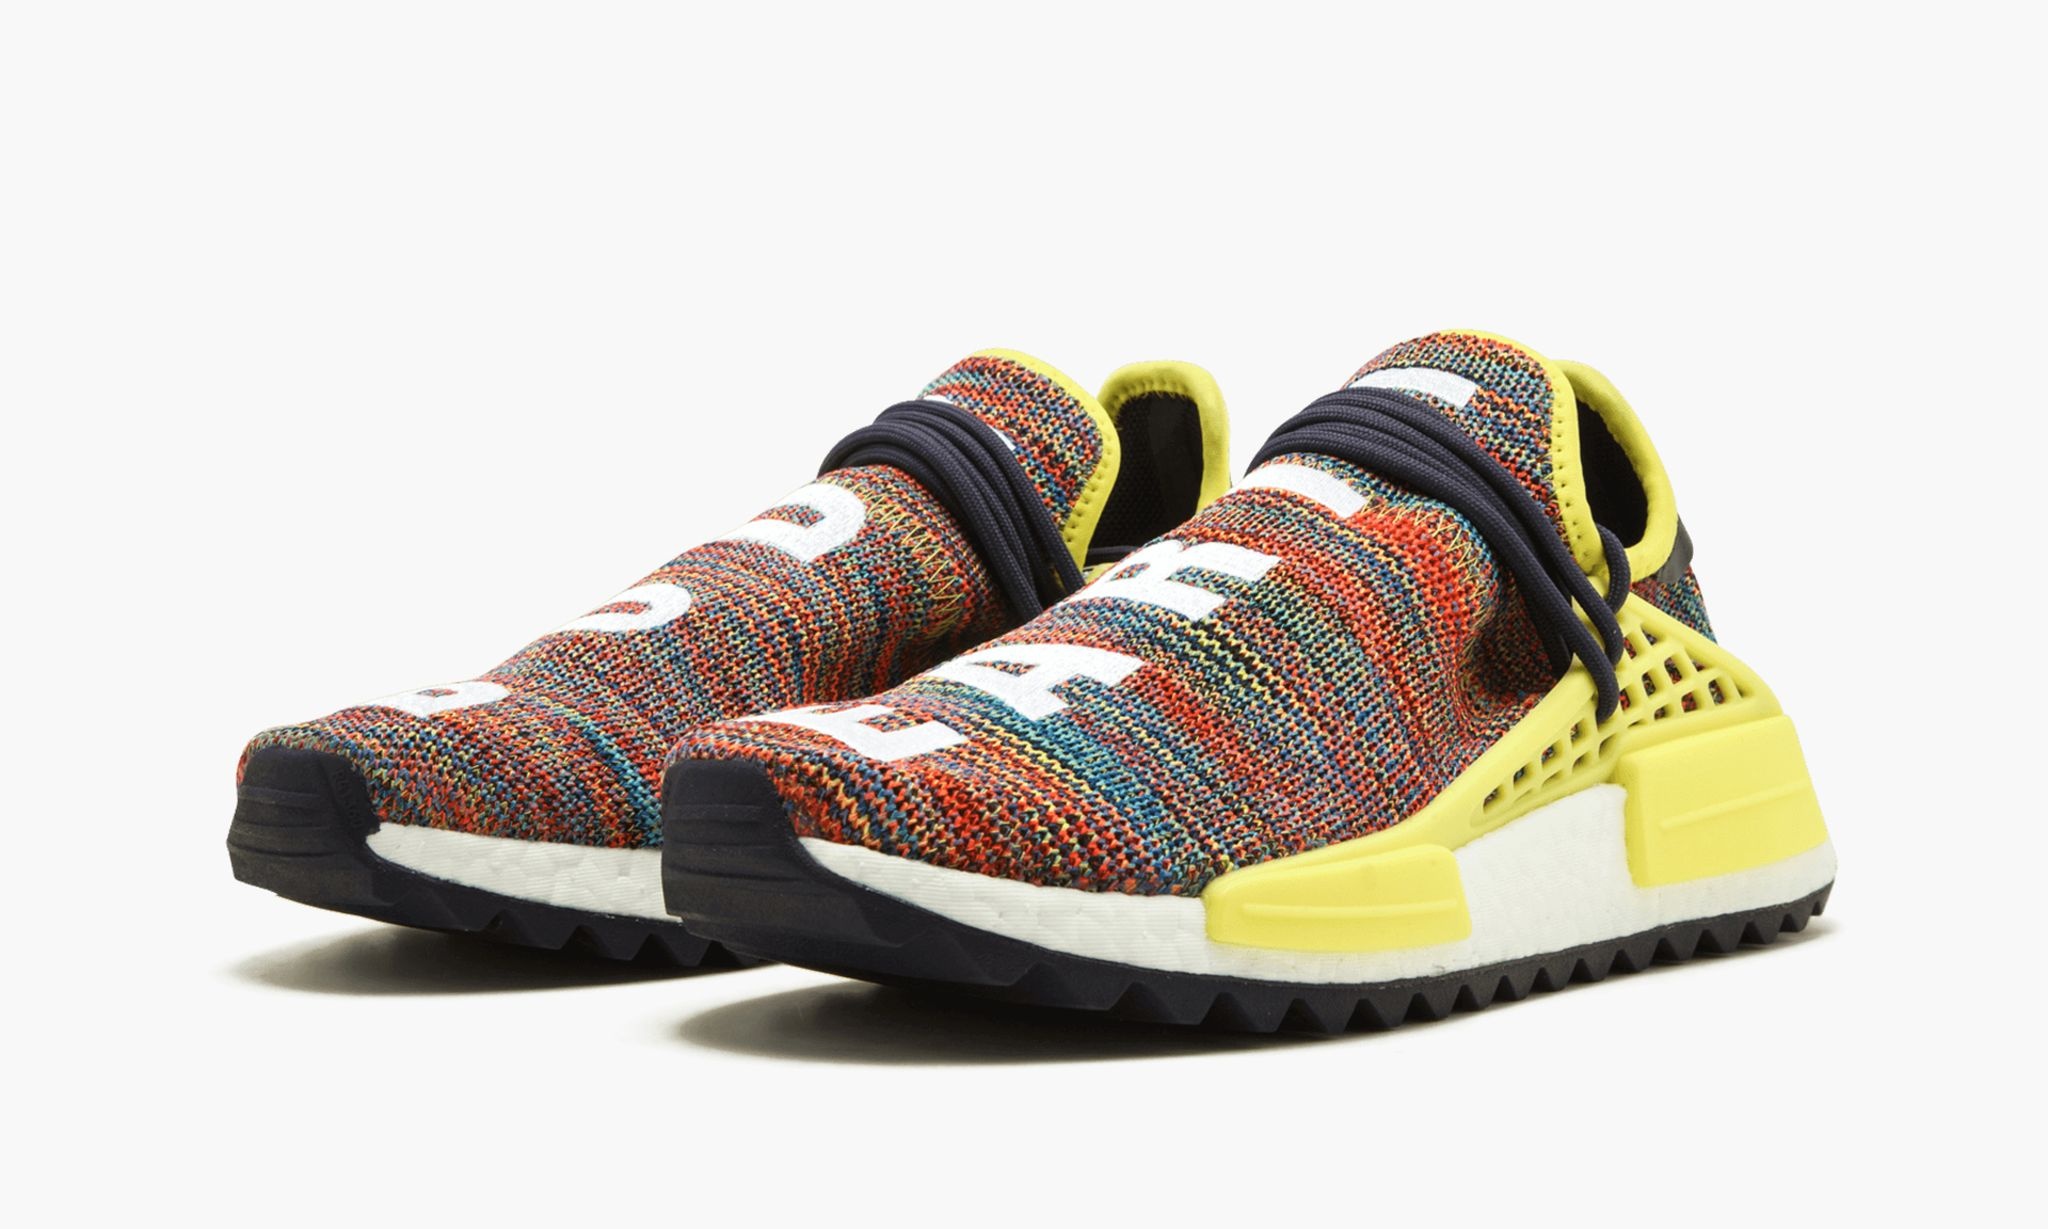 PW Human Race NMD TR "Multicolor" - 2